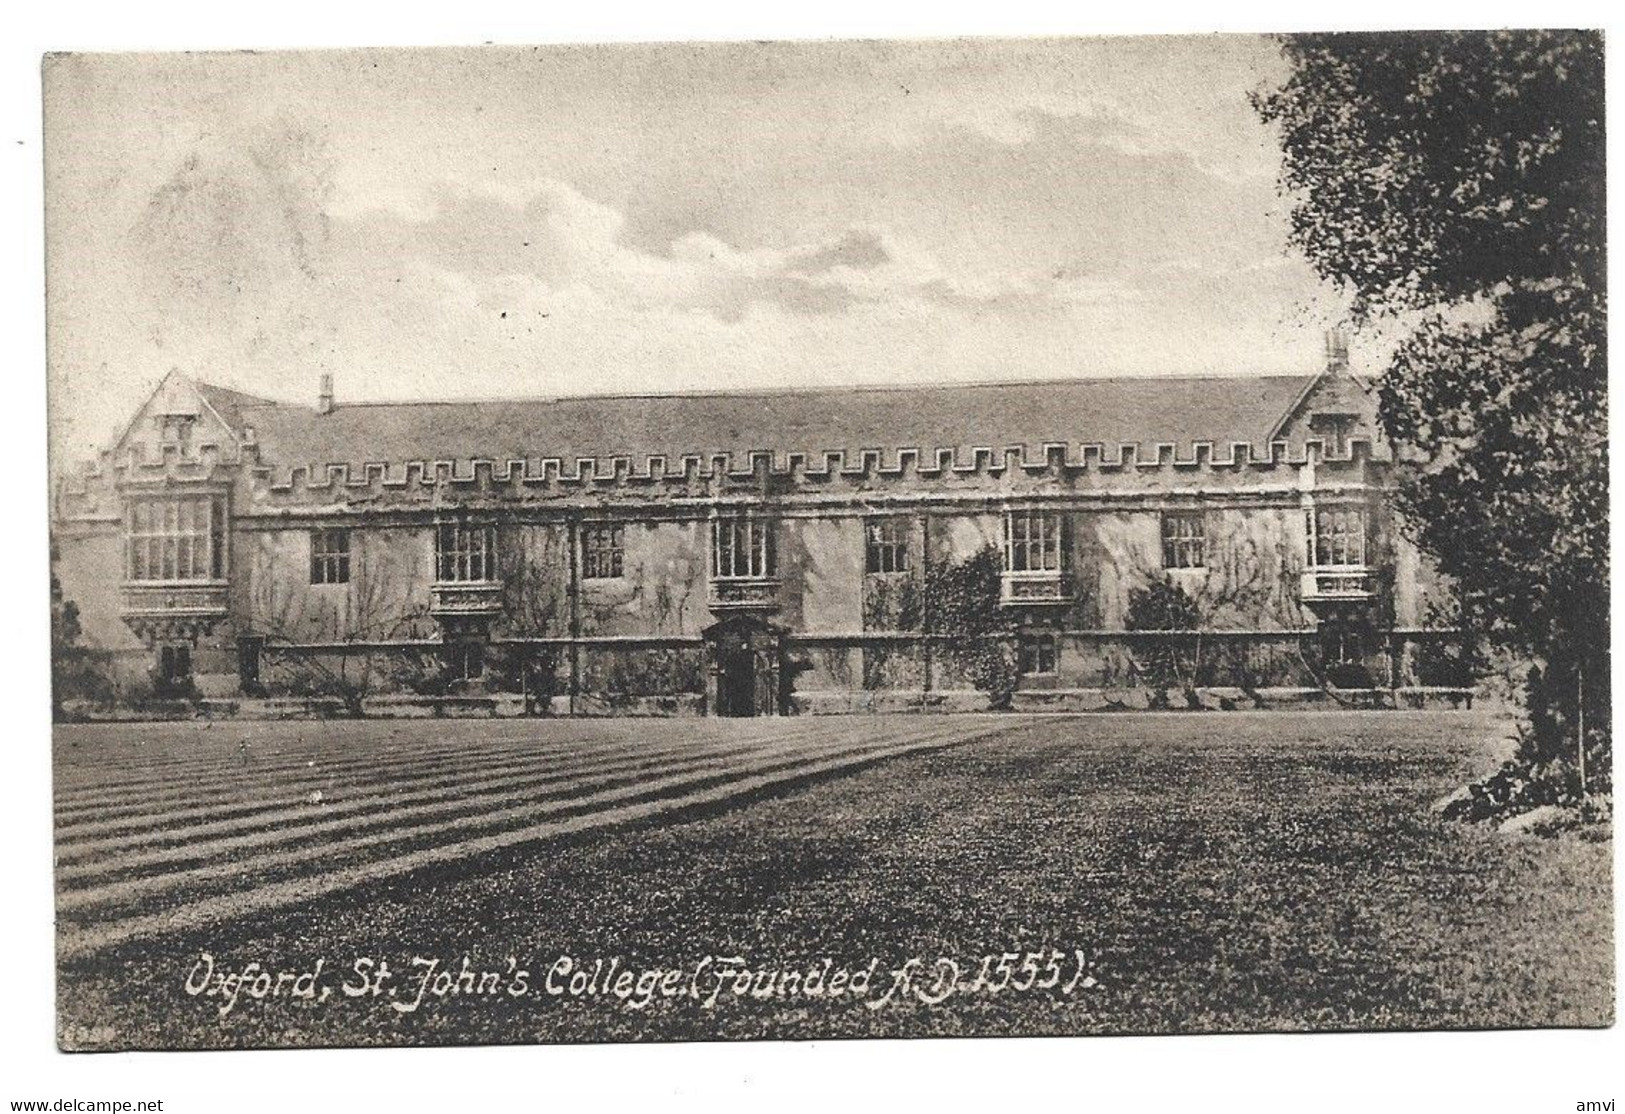 22-4 - 717 Oxford - St John's College ( Founded A.D. 1555 ) - Oxford